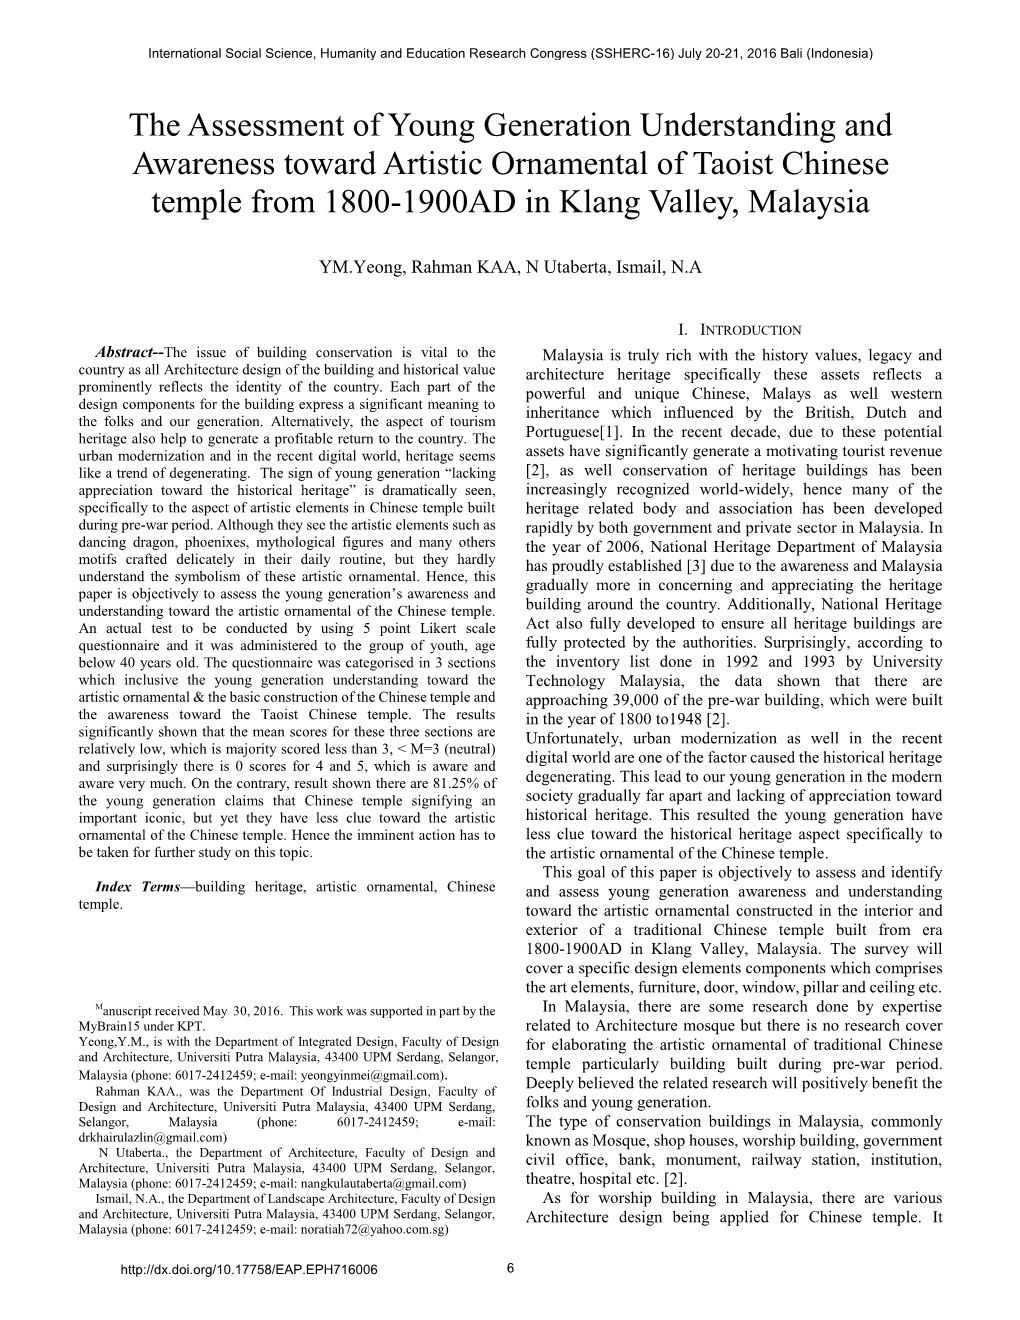 The Assessment of Young Generation Understanding and Awareness Toward Artistic Ornamental of Taoist Chinese Temple from 1800-1900AD in Klang Valley, Malaysia